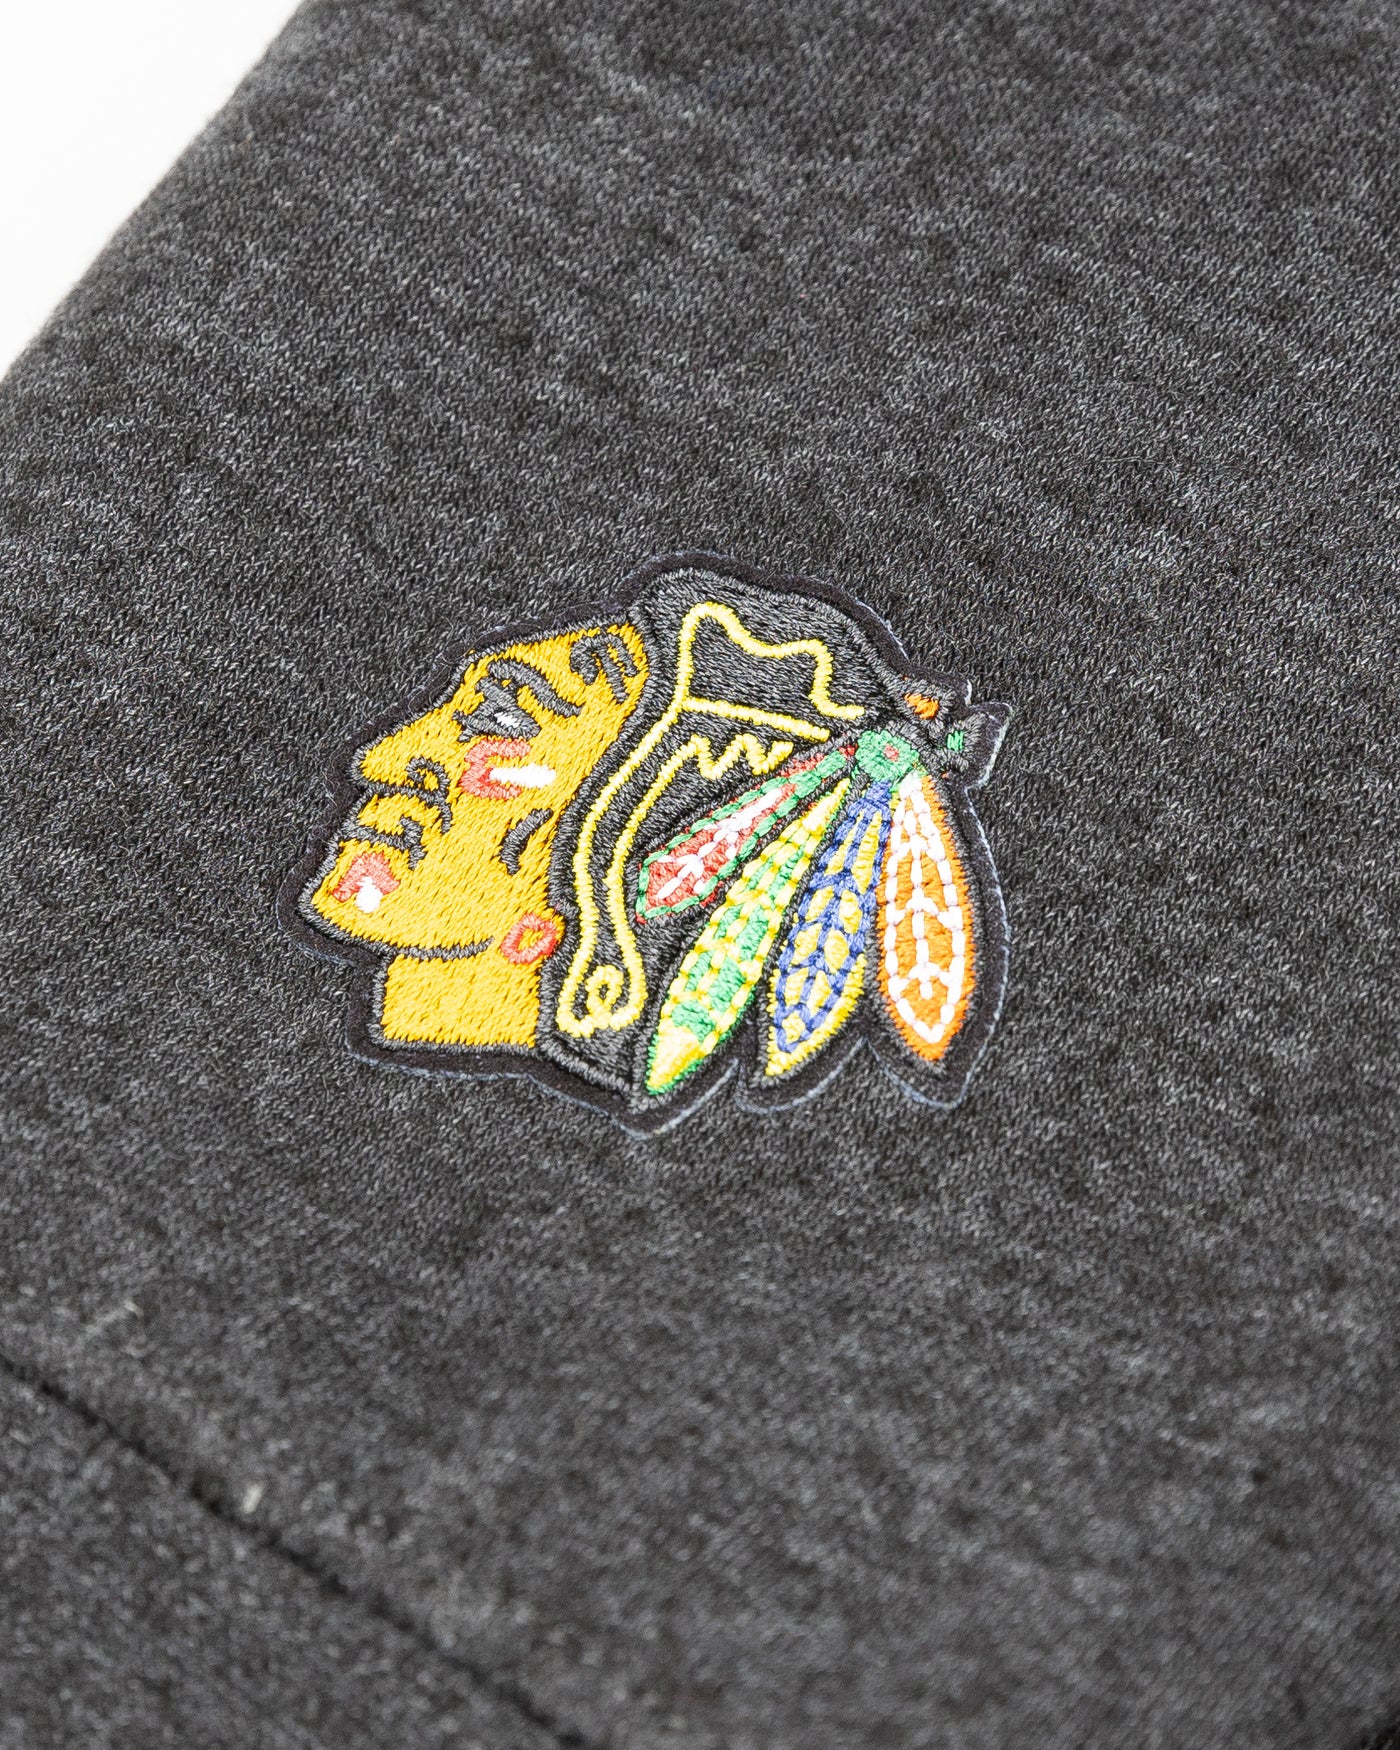 black Sportiqe hoodie with Chicago Blackhawks wordmark embroidered on front - alt detail lay flat